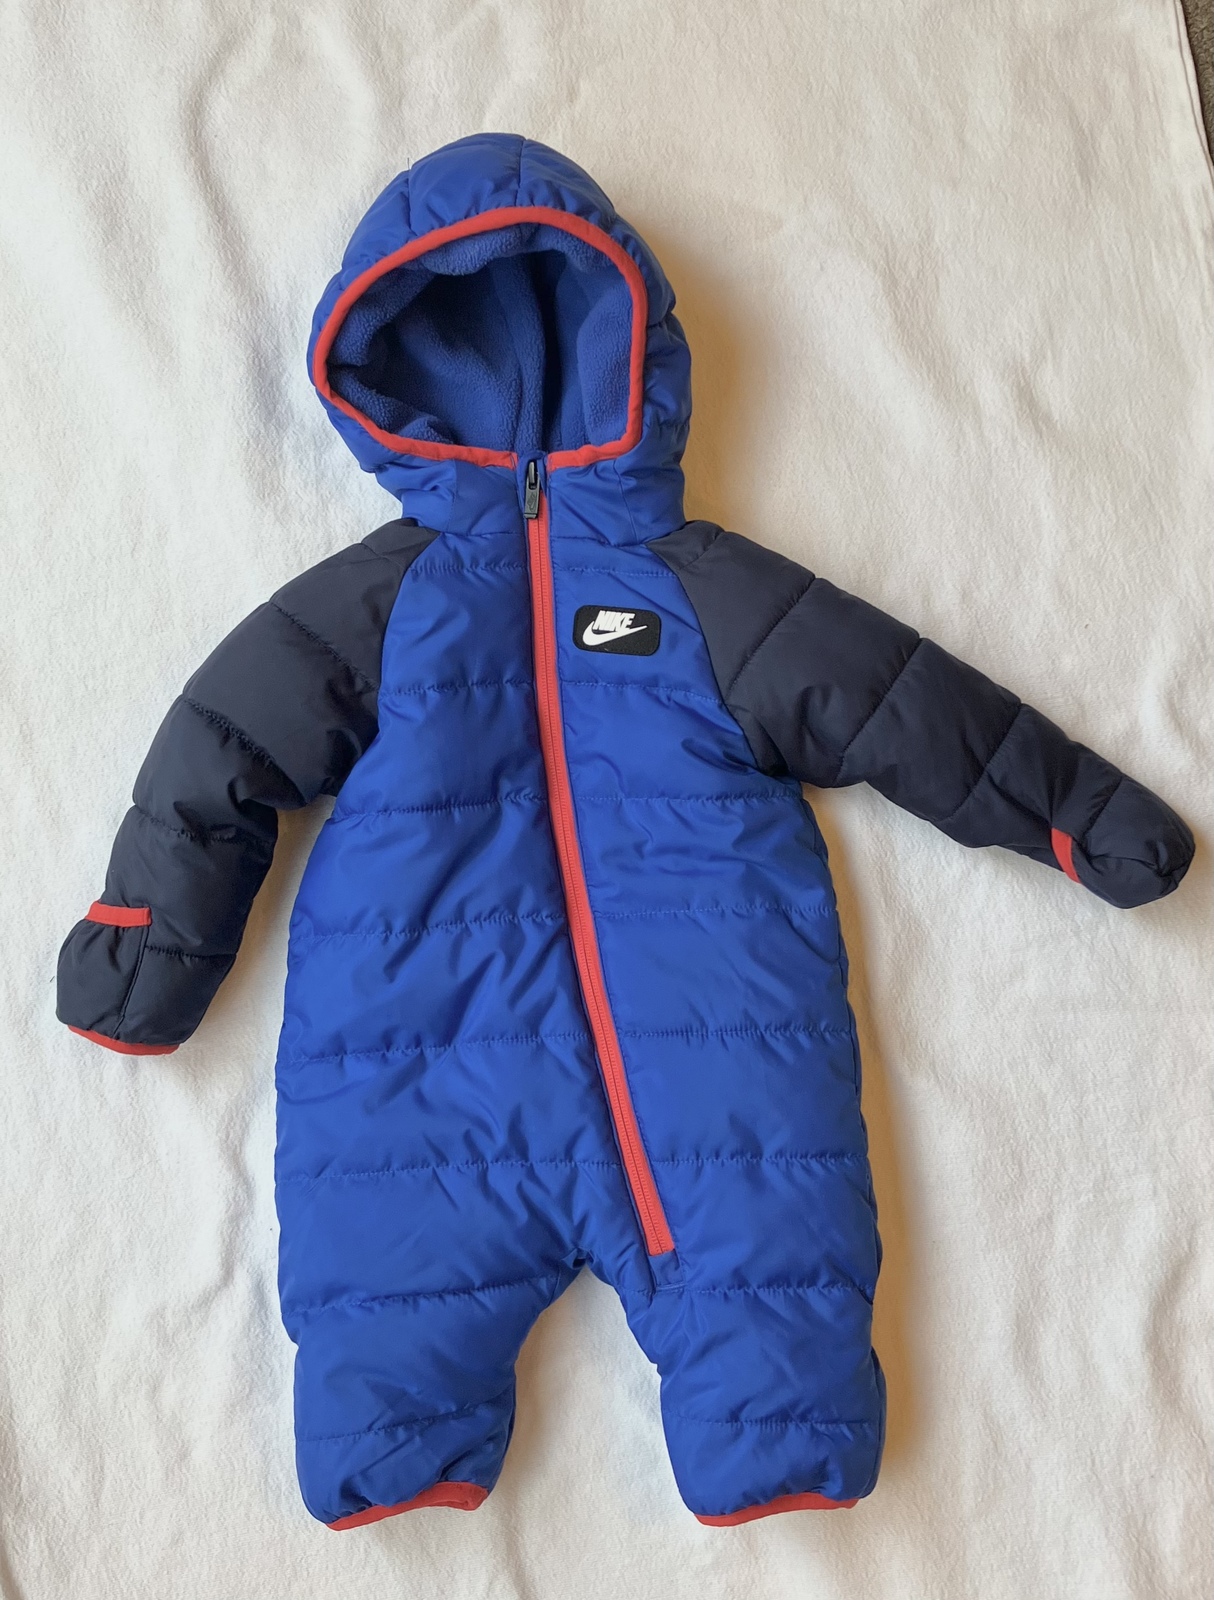 Nike Baby Puffer Snowsuit, Fleece-Lined with Hood - Game Royal (3 mo) (LIKE NEW) - $35.00